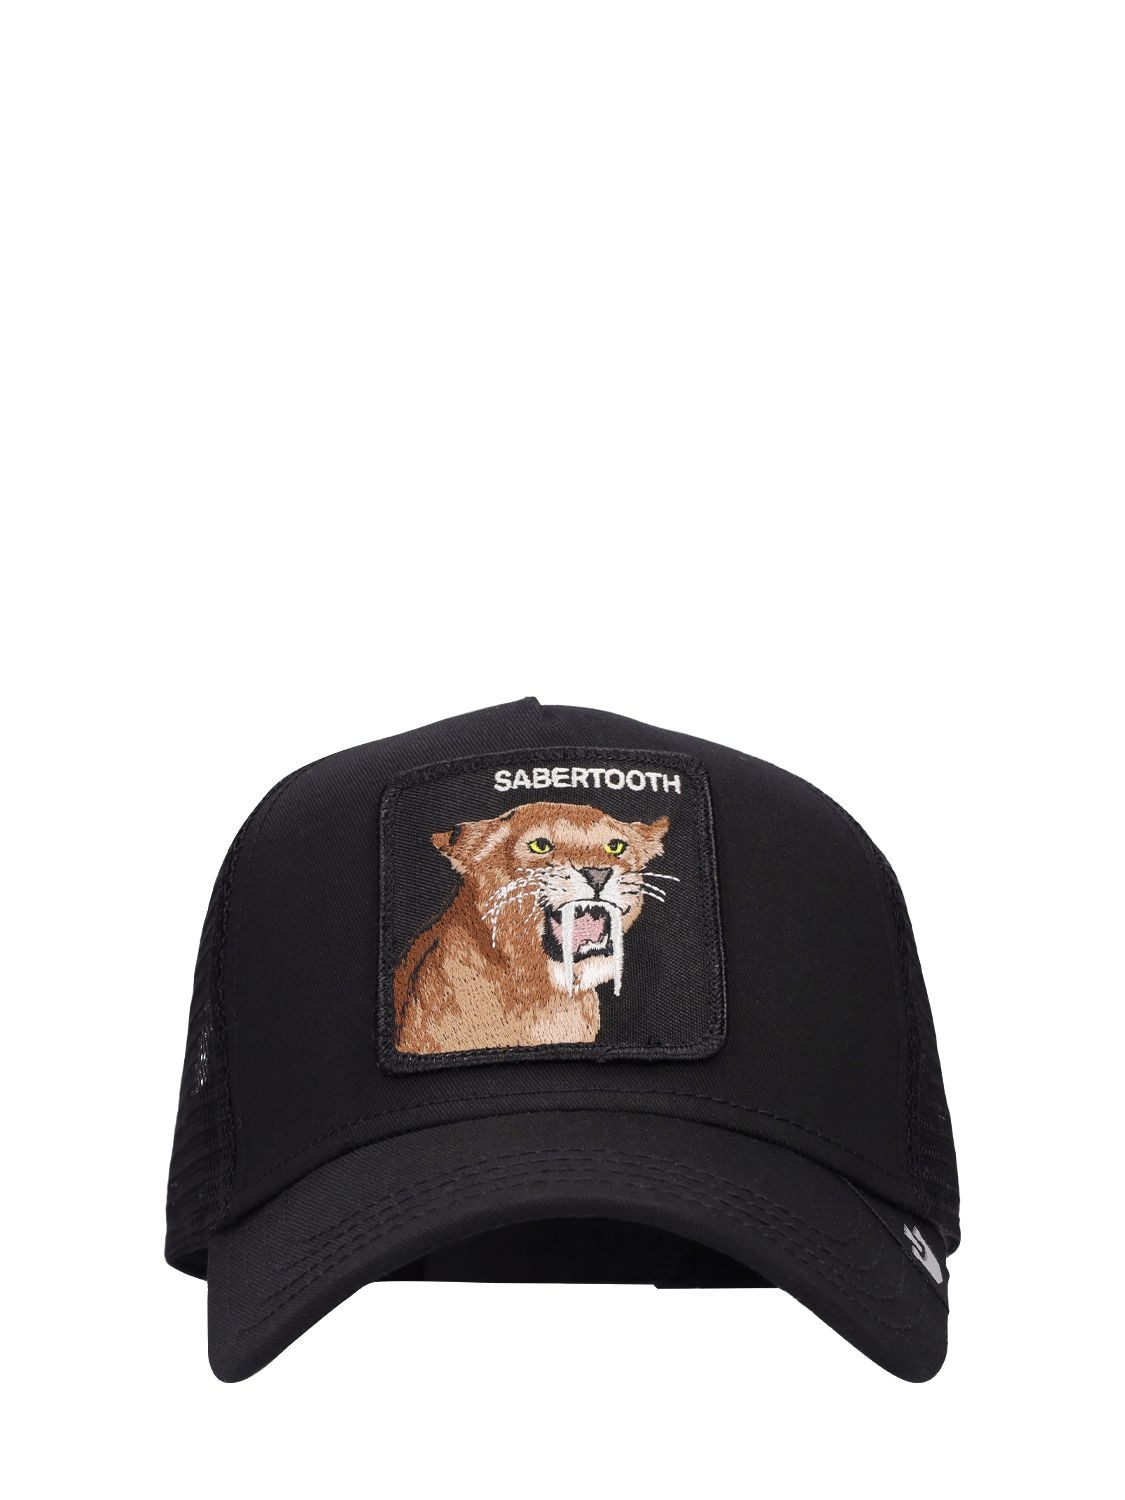 Image of The Sabretooth Trucker Hat W/ Patch